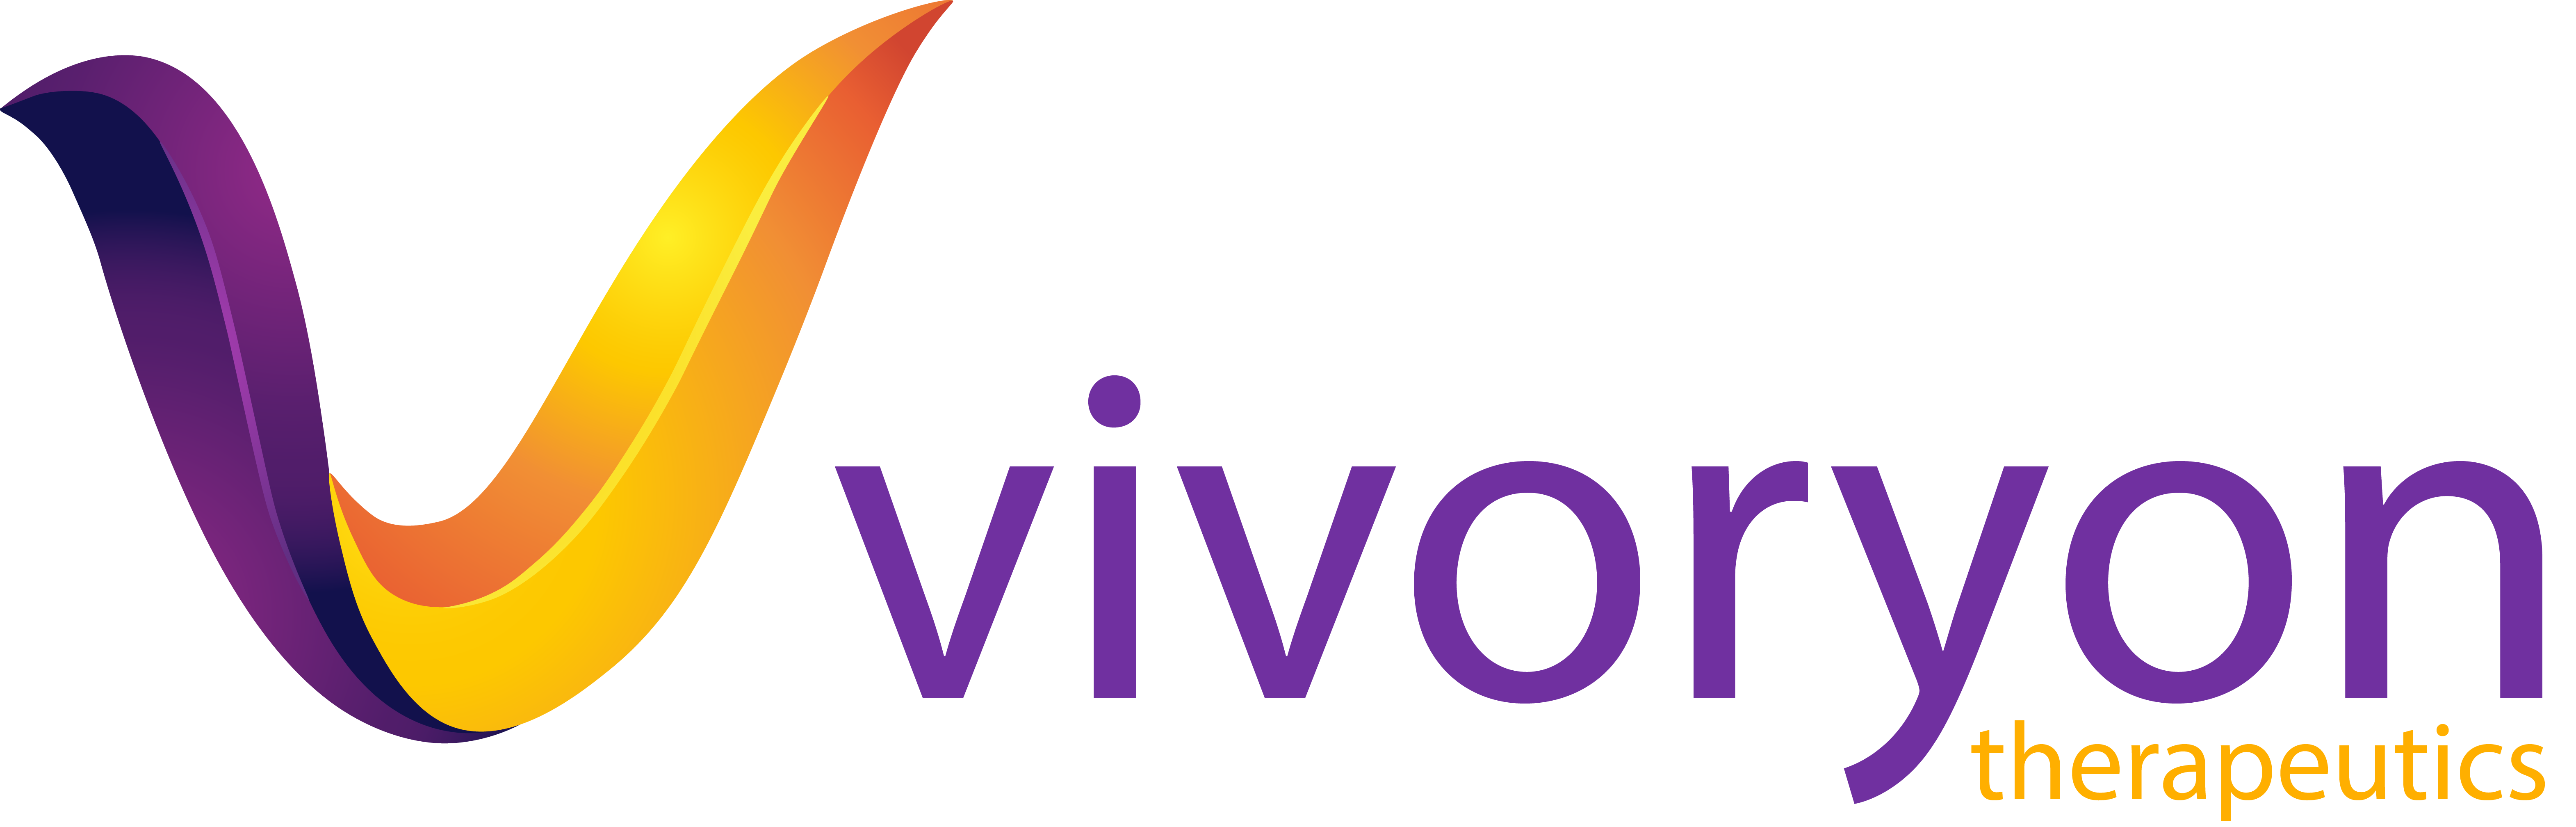 Vivoryon Therapeutics N.V. Announces Nominations to Reappoint Ulrich Dauer as CEO and to Appoint Florian Schmid as CFO